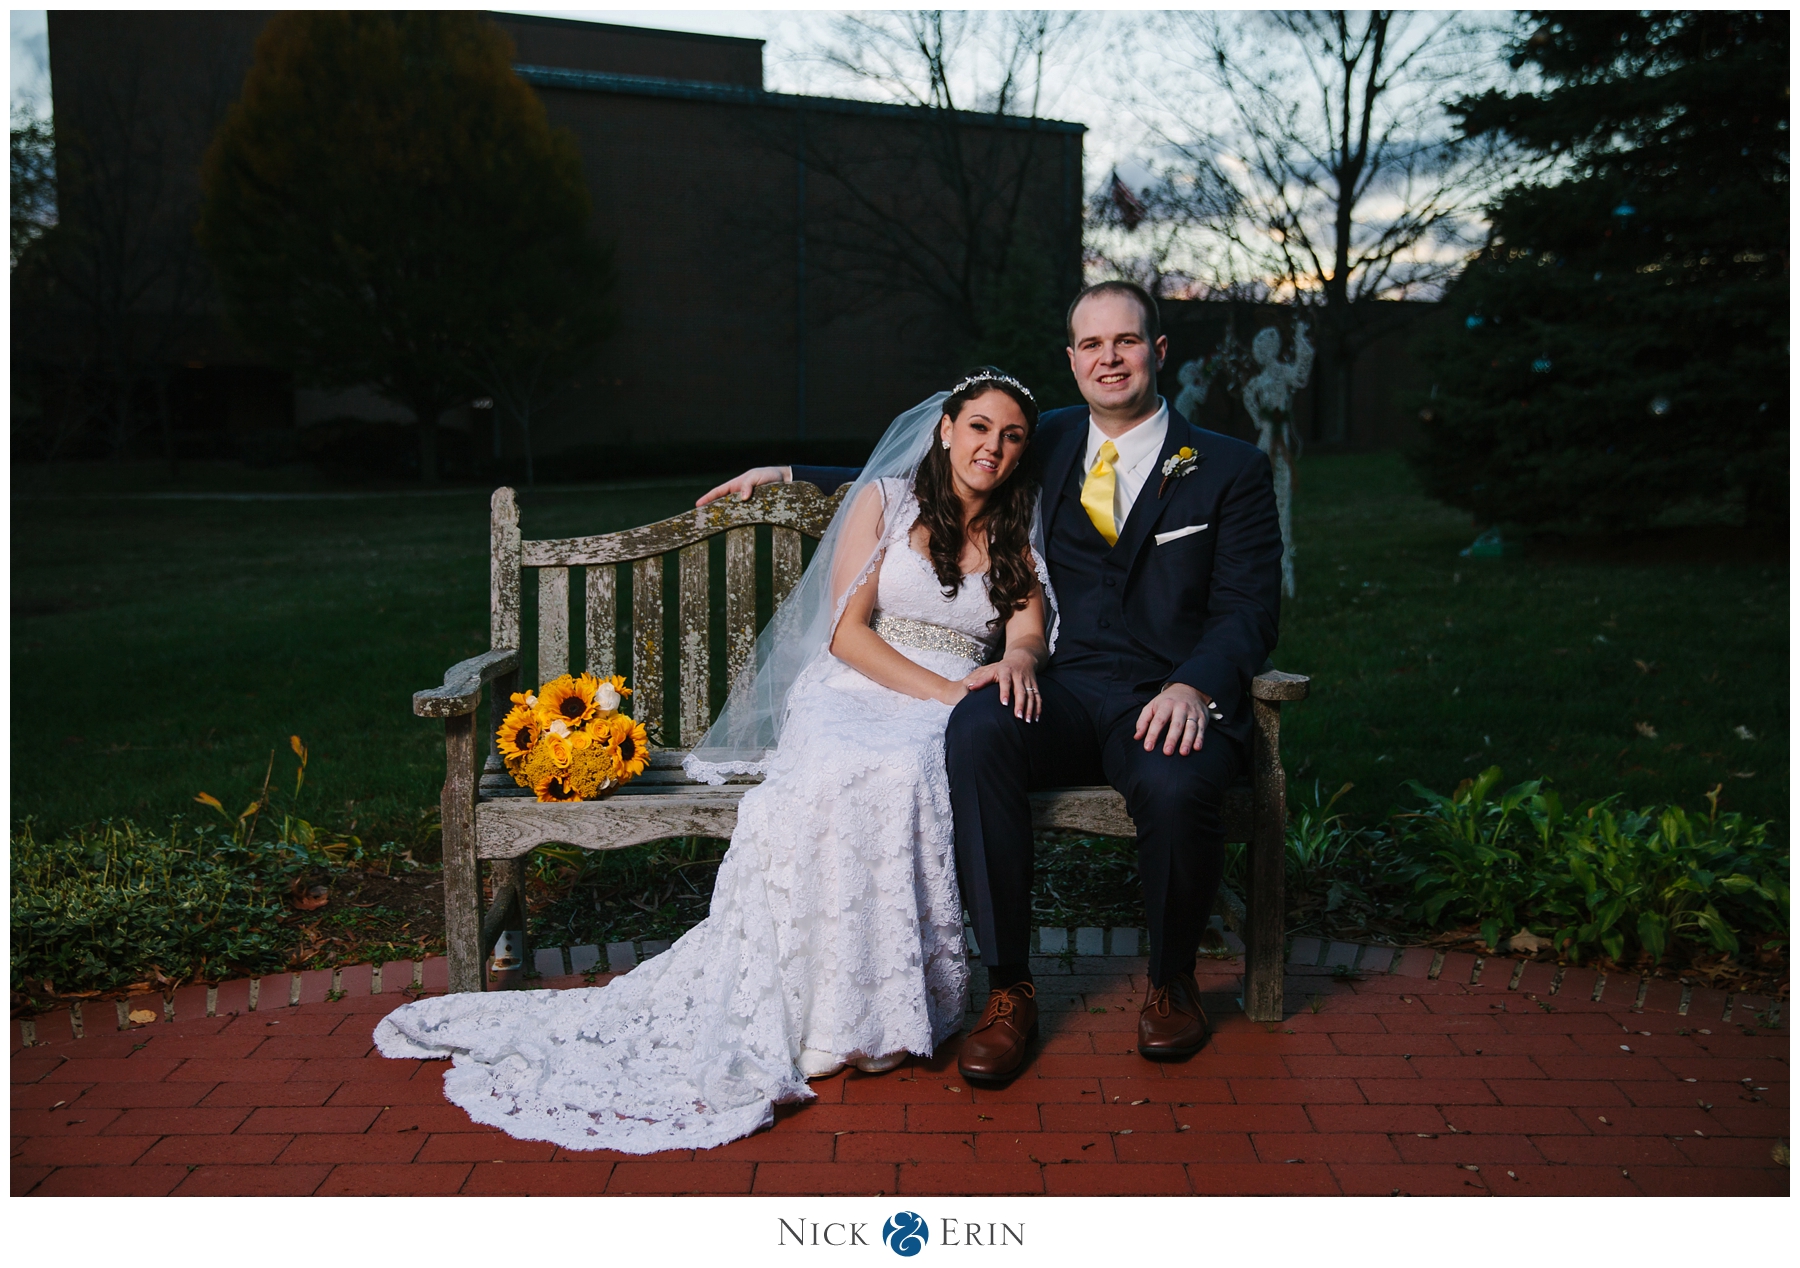 Donner_Photography_Fort Myer Wedding_Katie & Will_0007